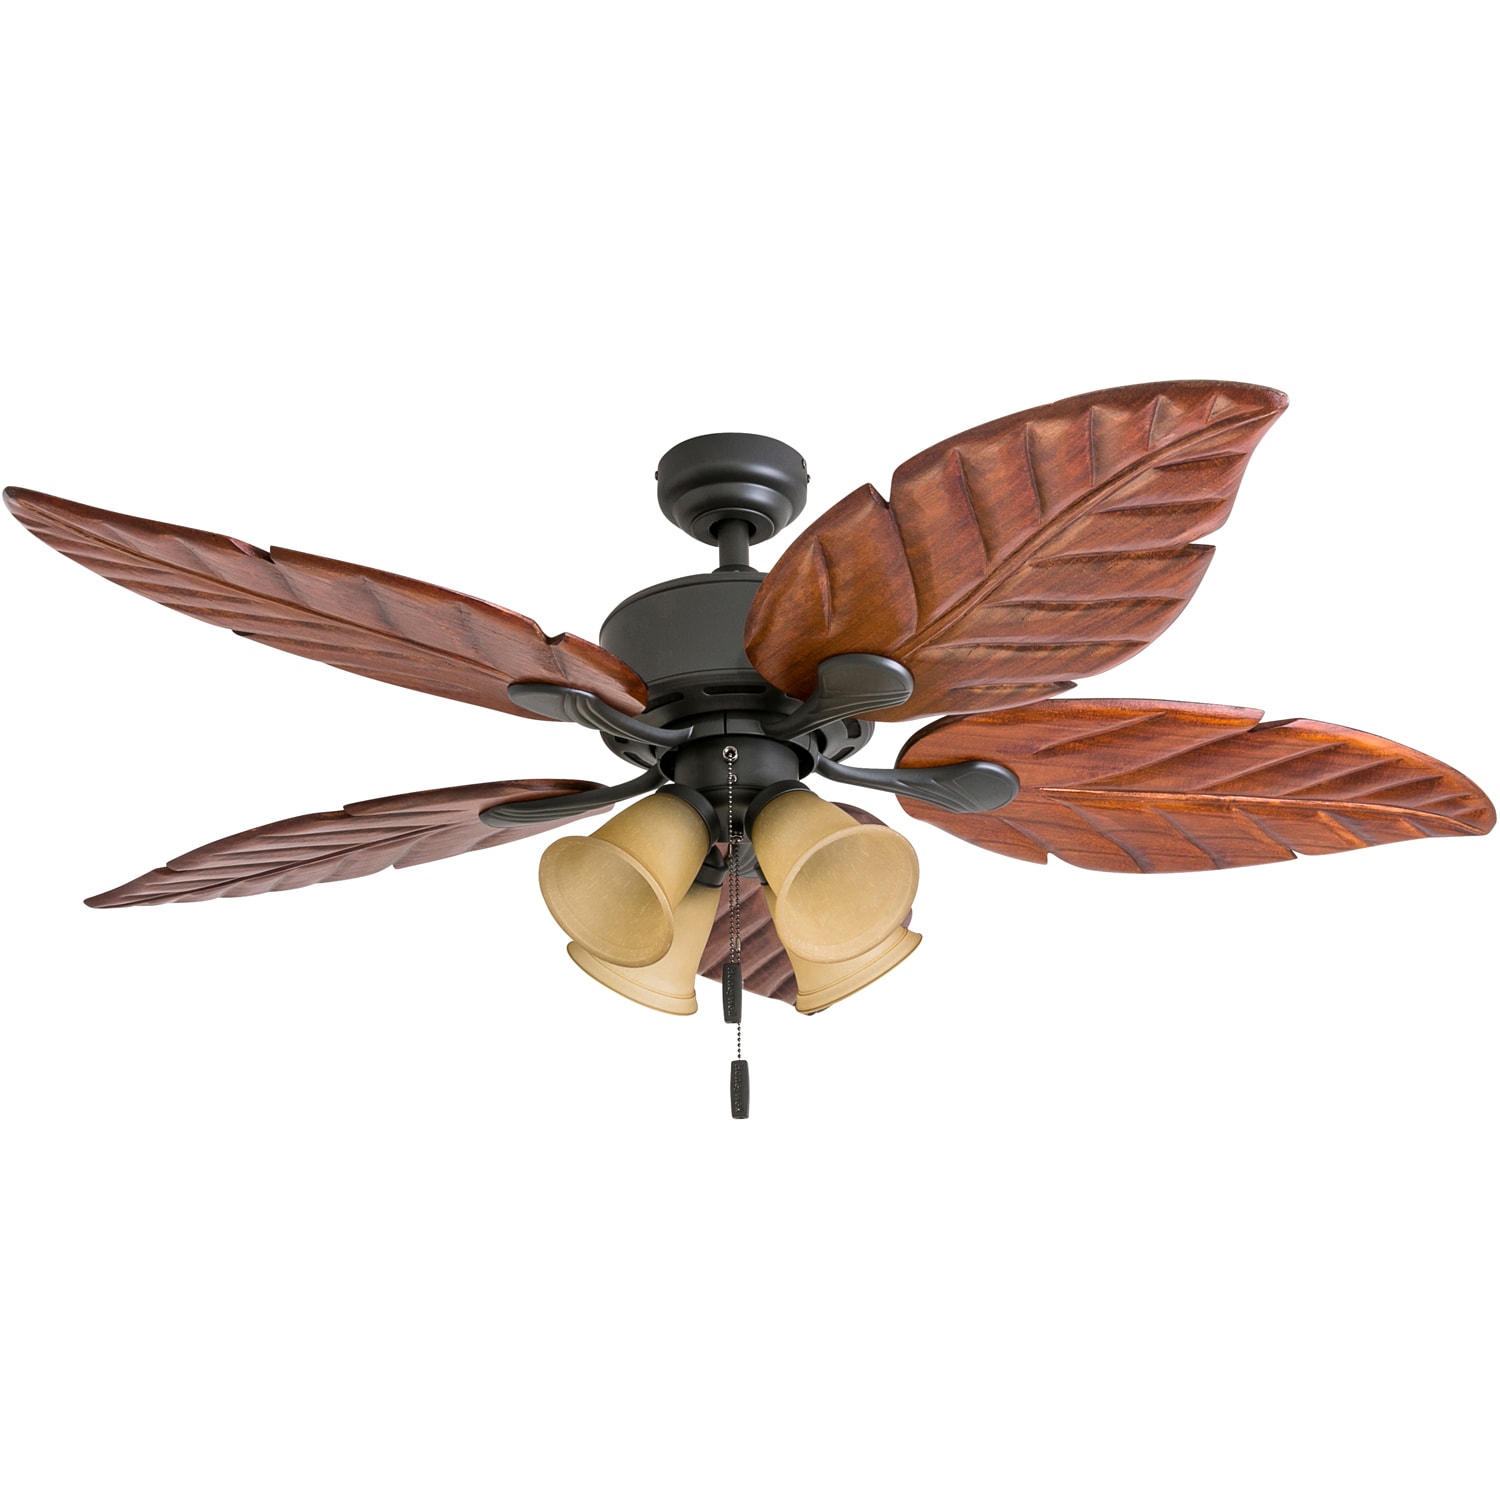 Details about   Downrod 52" Honeywell Palm Island Bronze Room Reverible Ceiling Fan Palm 5-Blade 